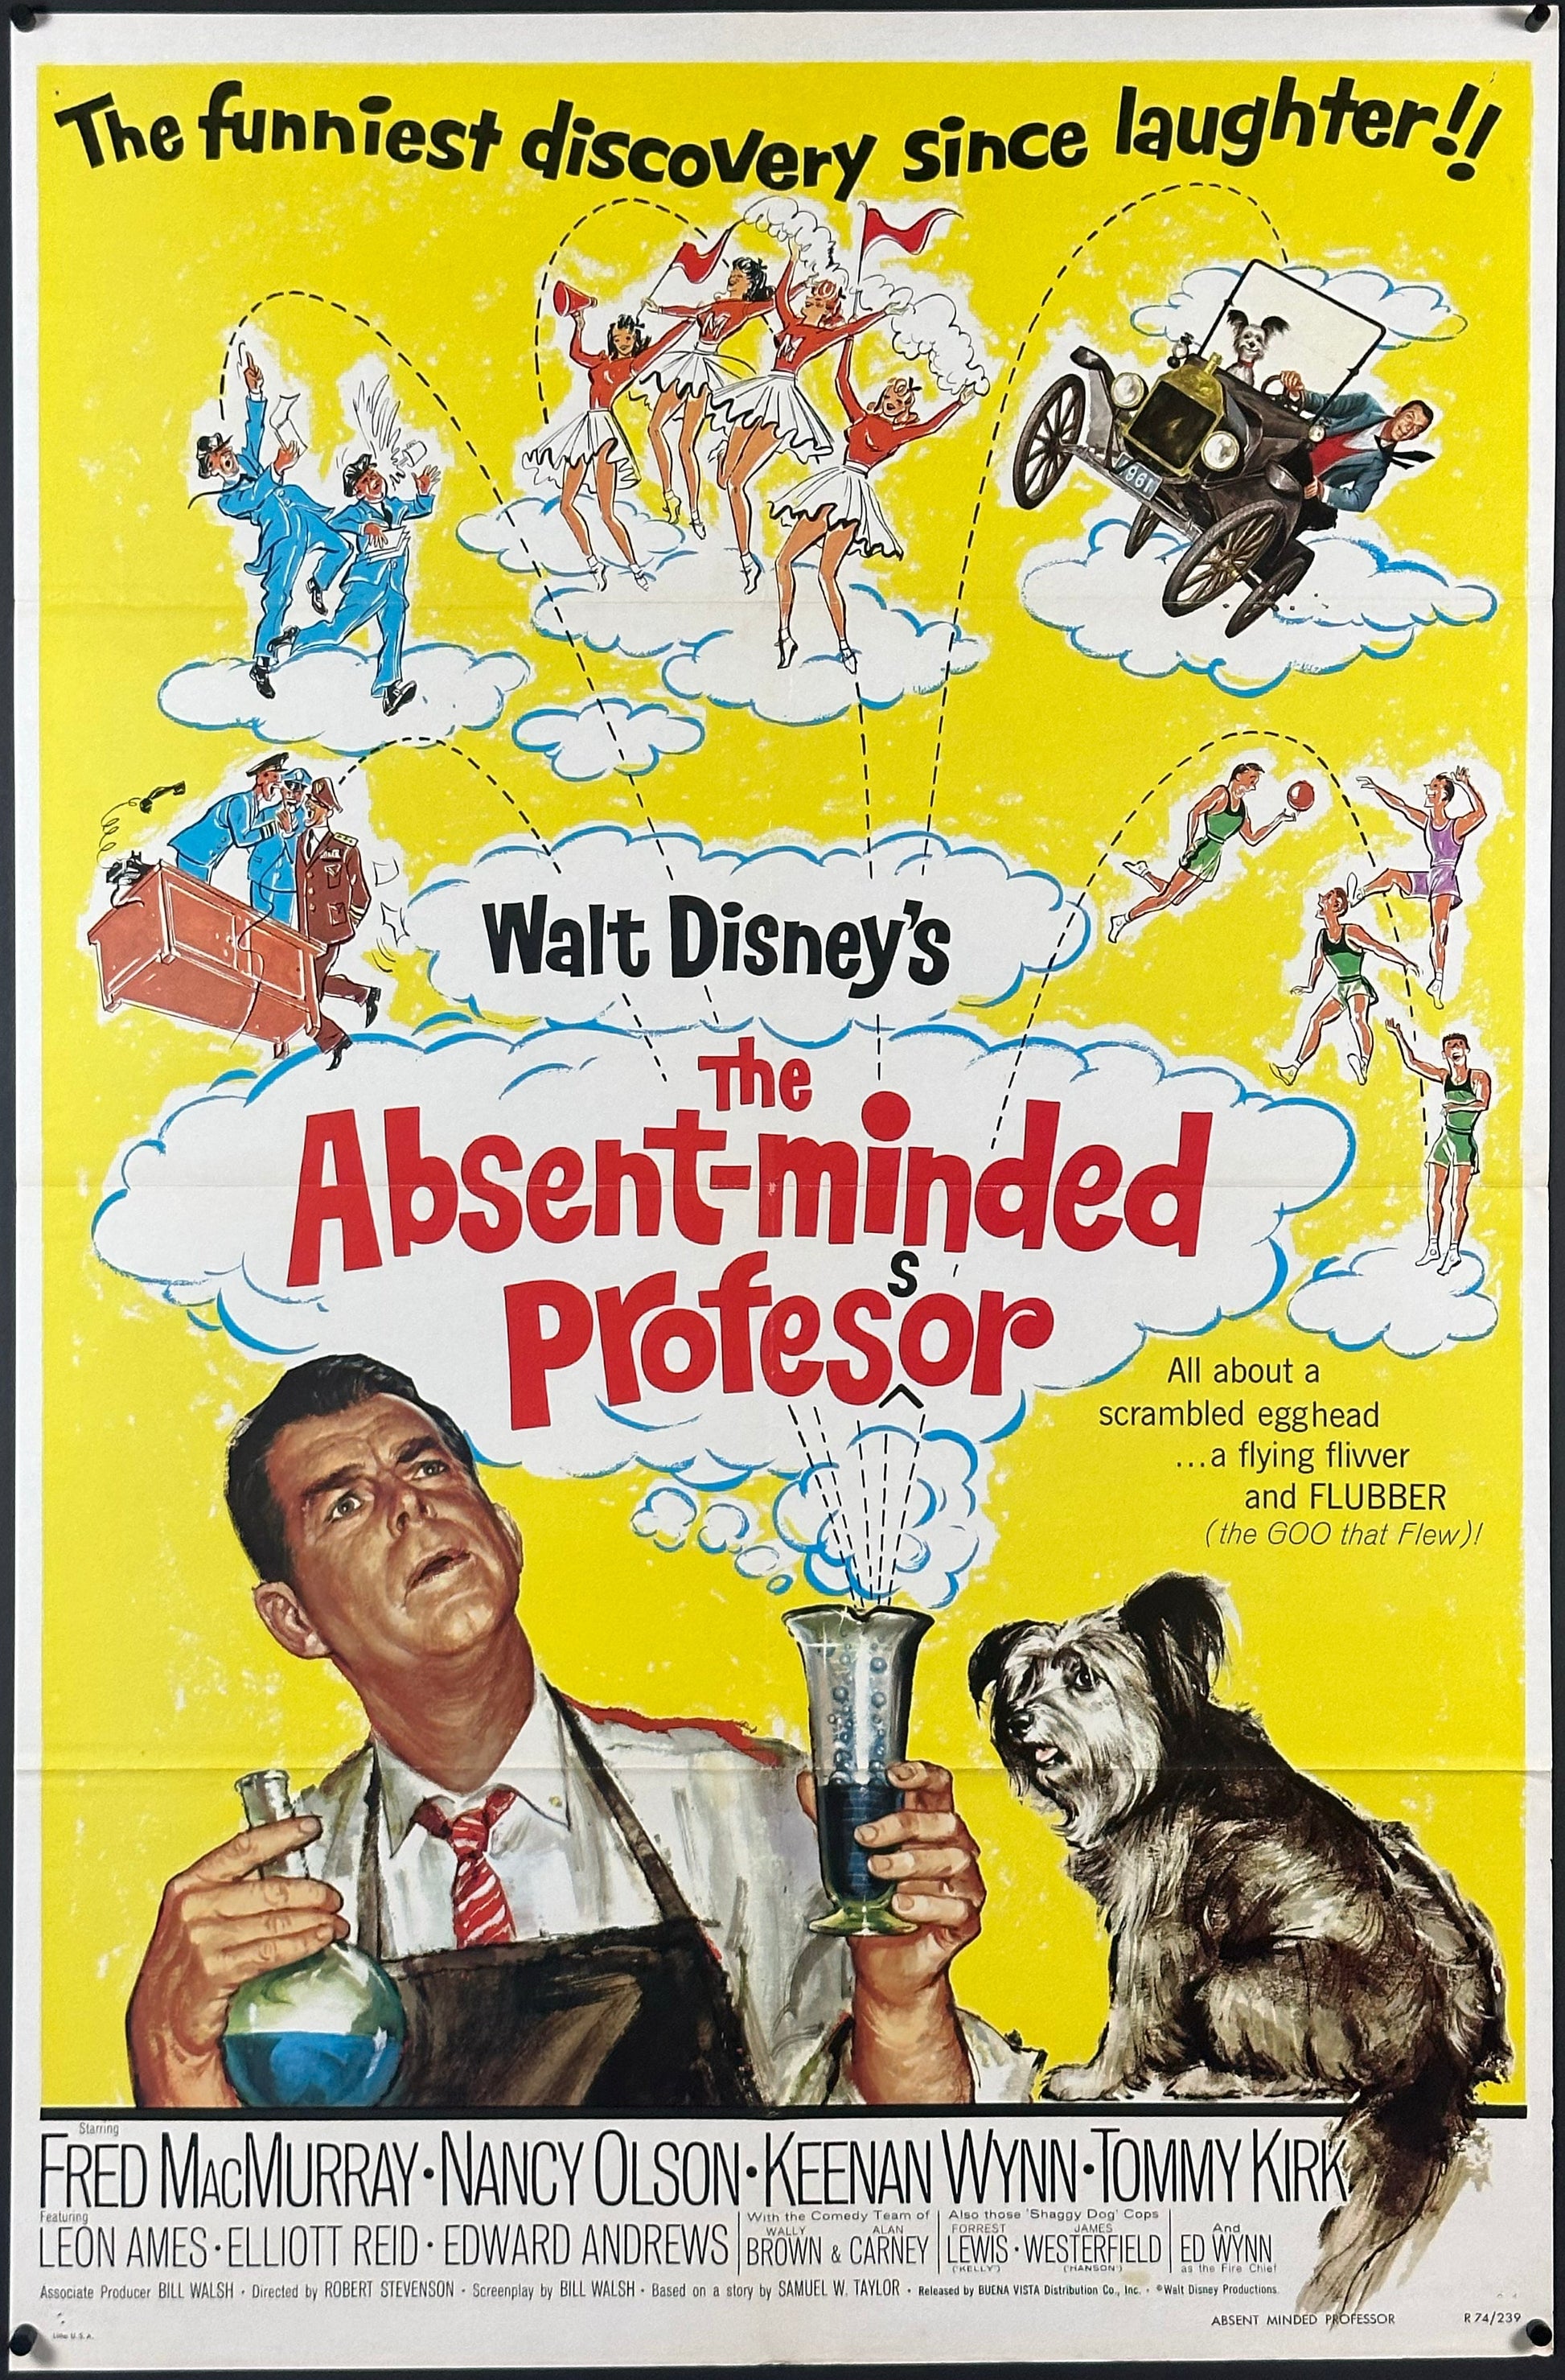 The Absent-minded Professor - posterpalace.com